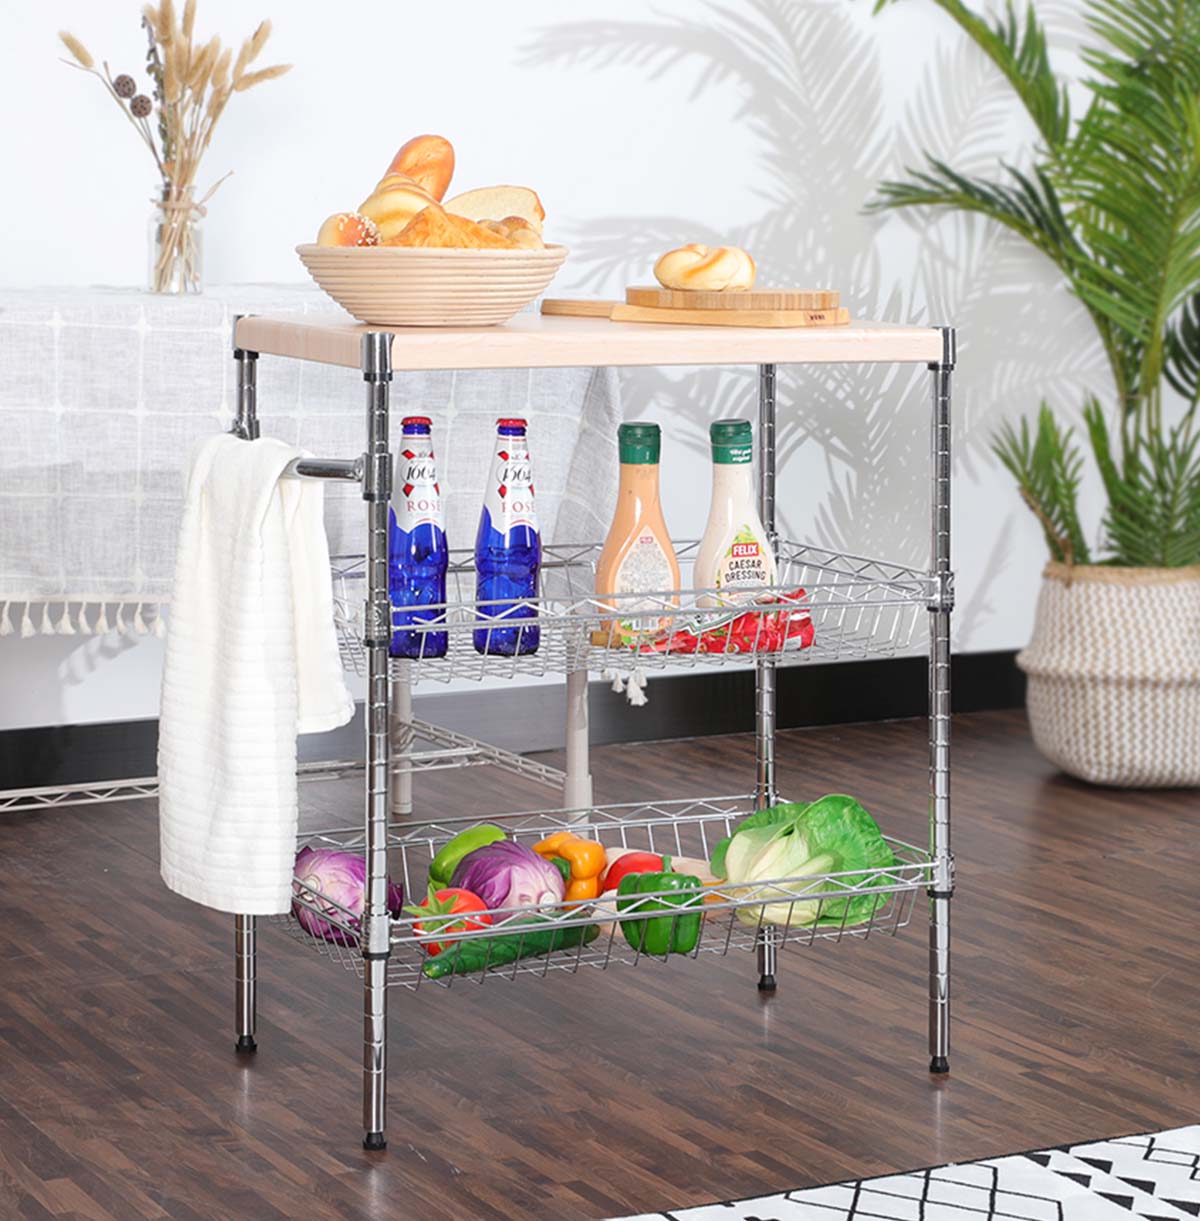 stainless steel wire shelf wall mounted